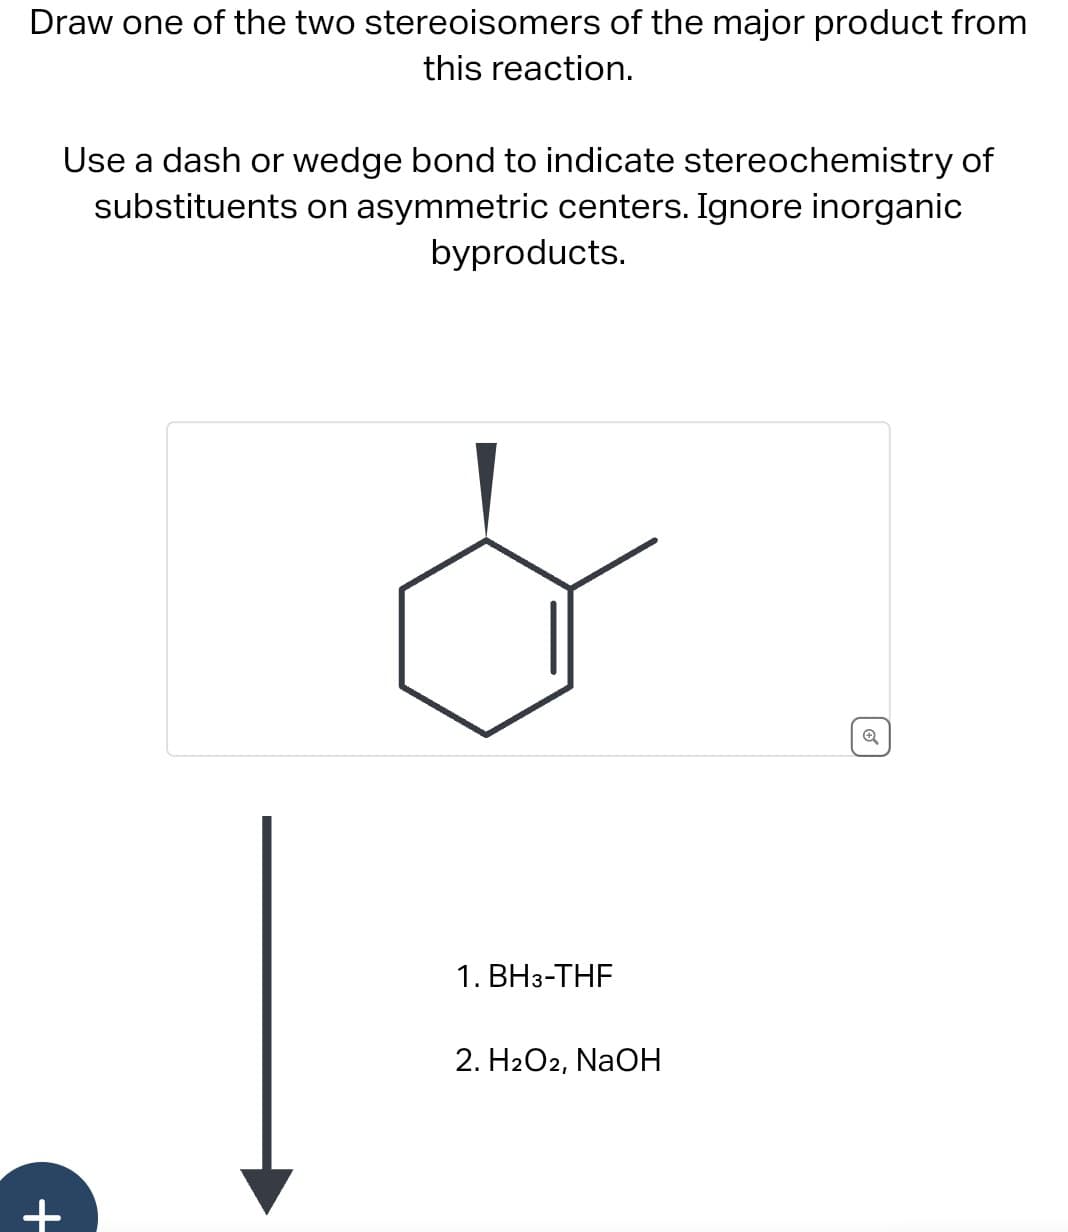 +
Draw one of the two stereoisomers of the major product from
this reaction.
Use a dash or wedge bond to indicate stereochemistry of
substituents on asymmetric centers. Ignore inorganic
byproducts.
1. BH 3-THF
2. H2O2, NaOH
Q